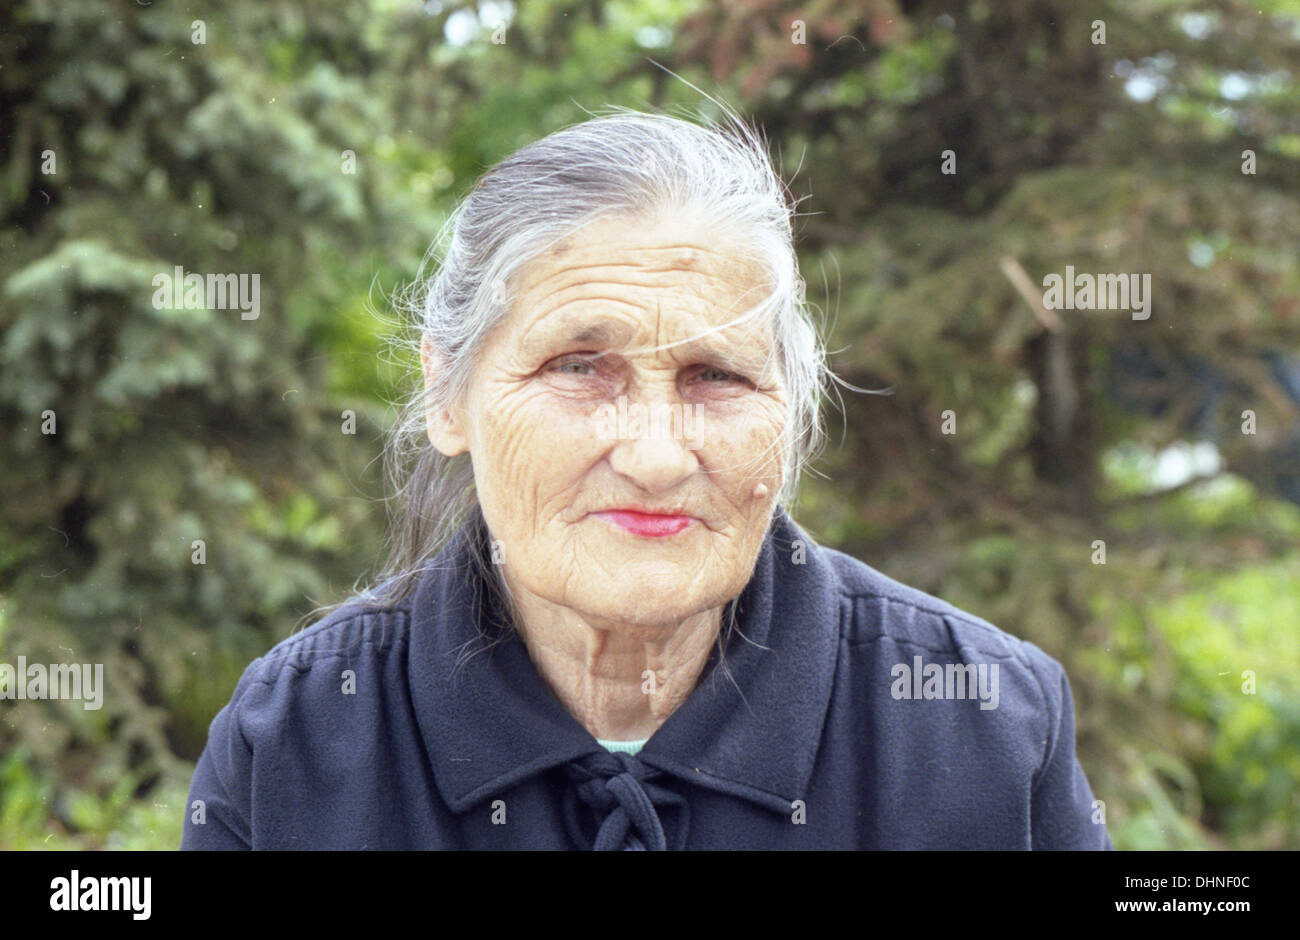 Russian Mature Old